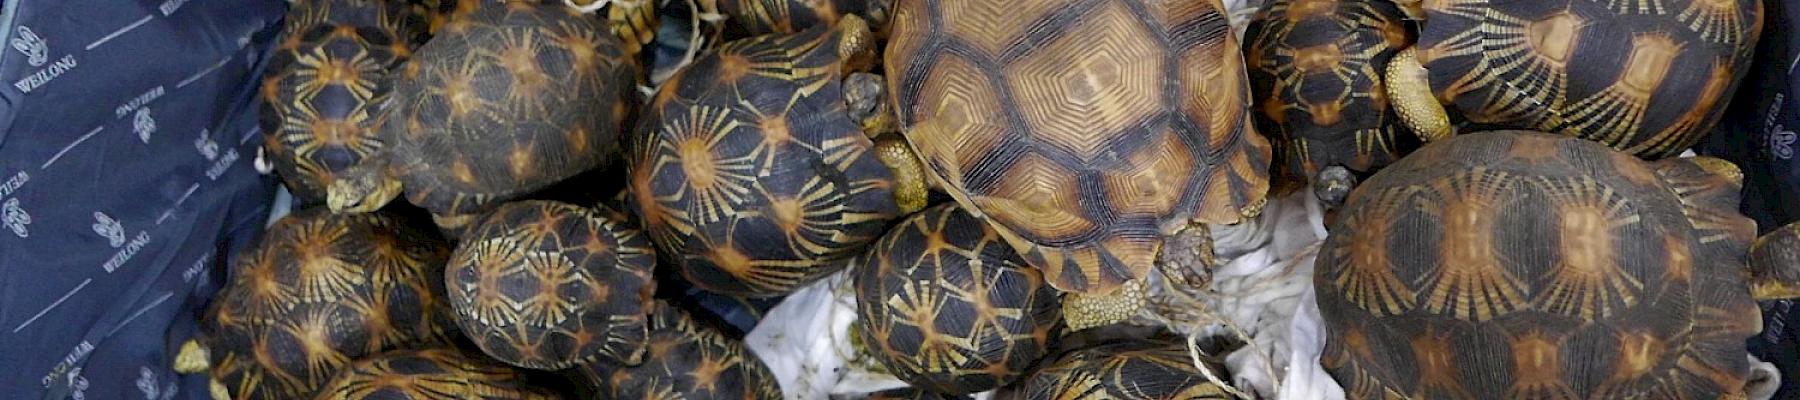 Ploughshare and radiated tortoises seized in Malaysia in May 2017 – Elizabeth John/TRAFFIC